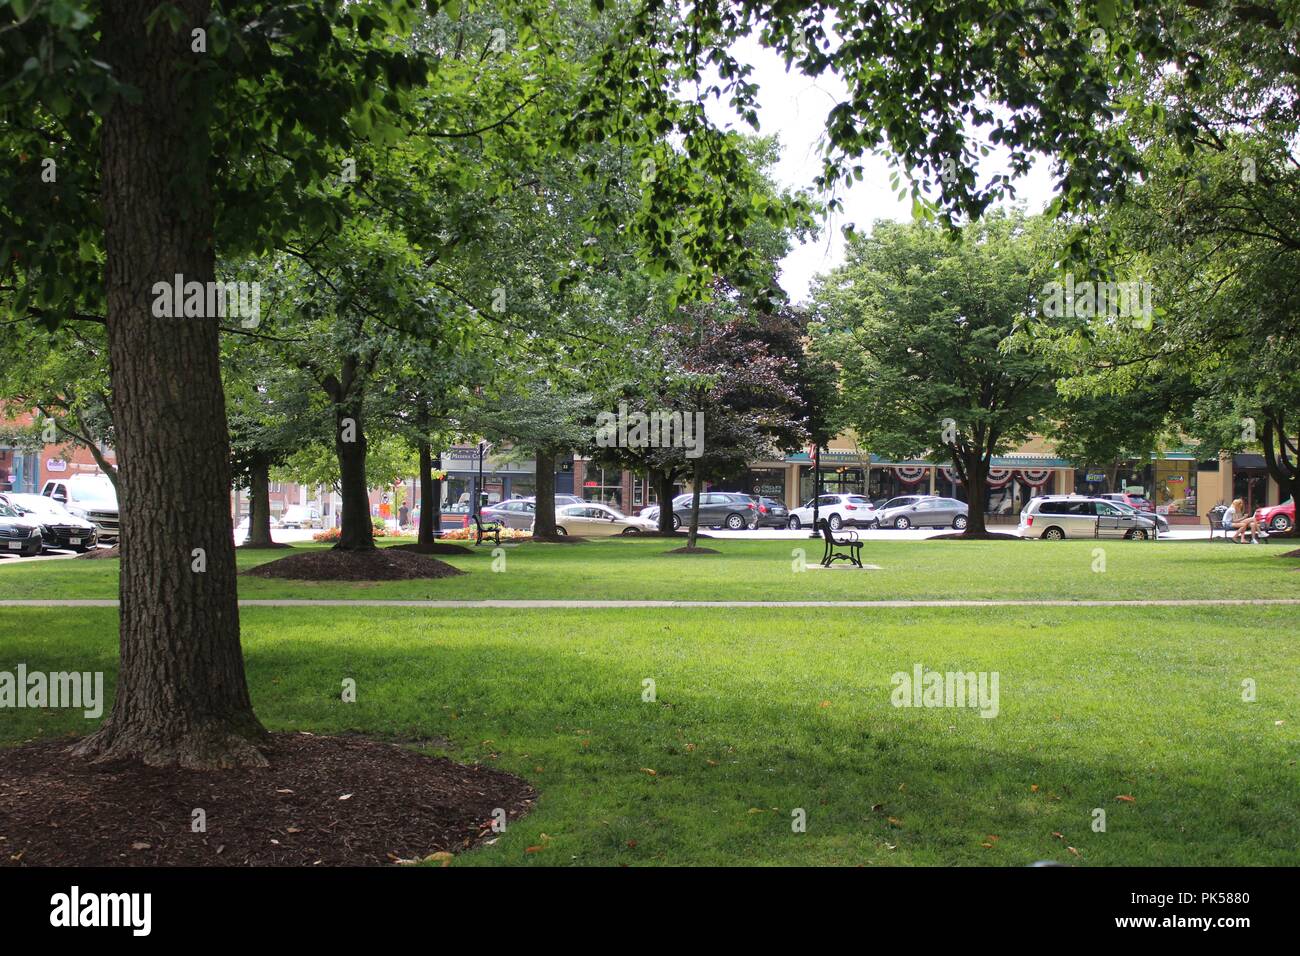 view of small town shops on a strip from a small park with traffic on the street Stock Photo